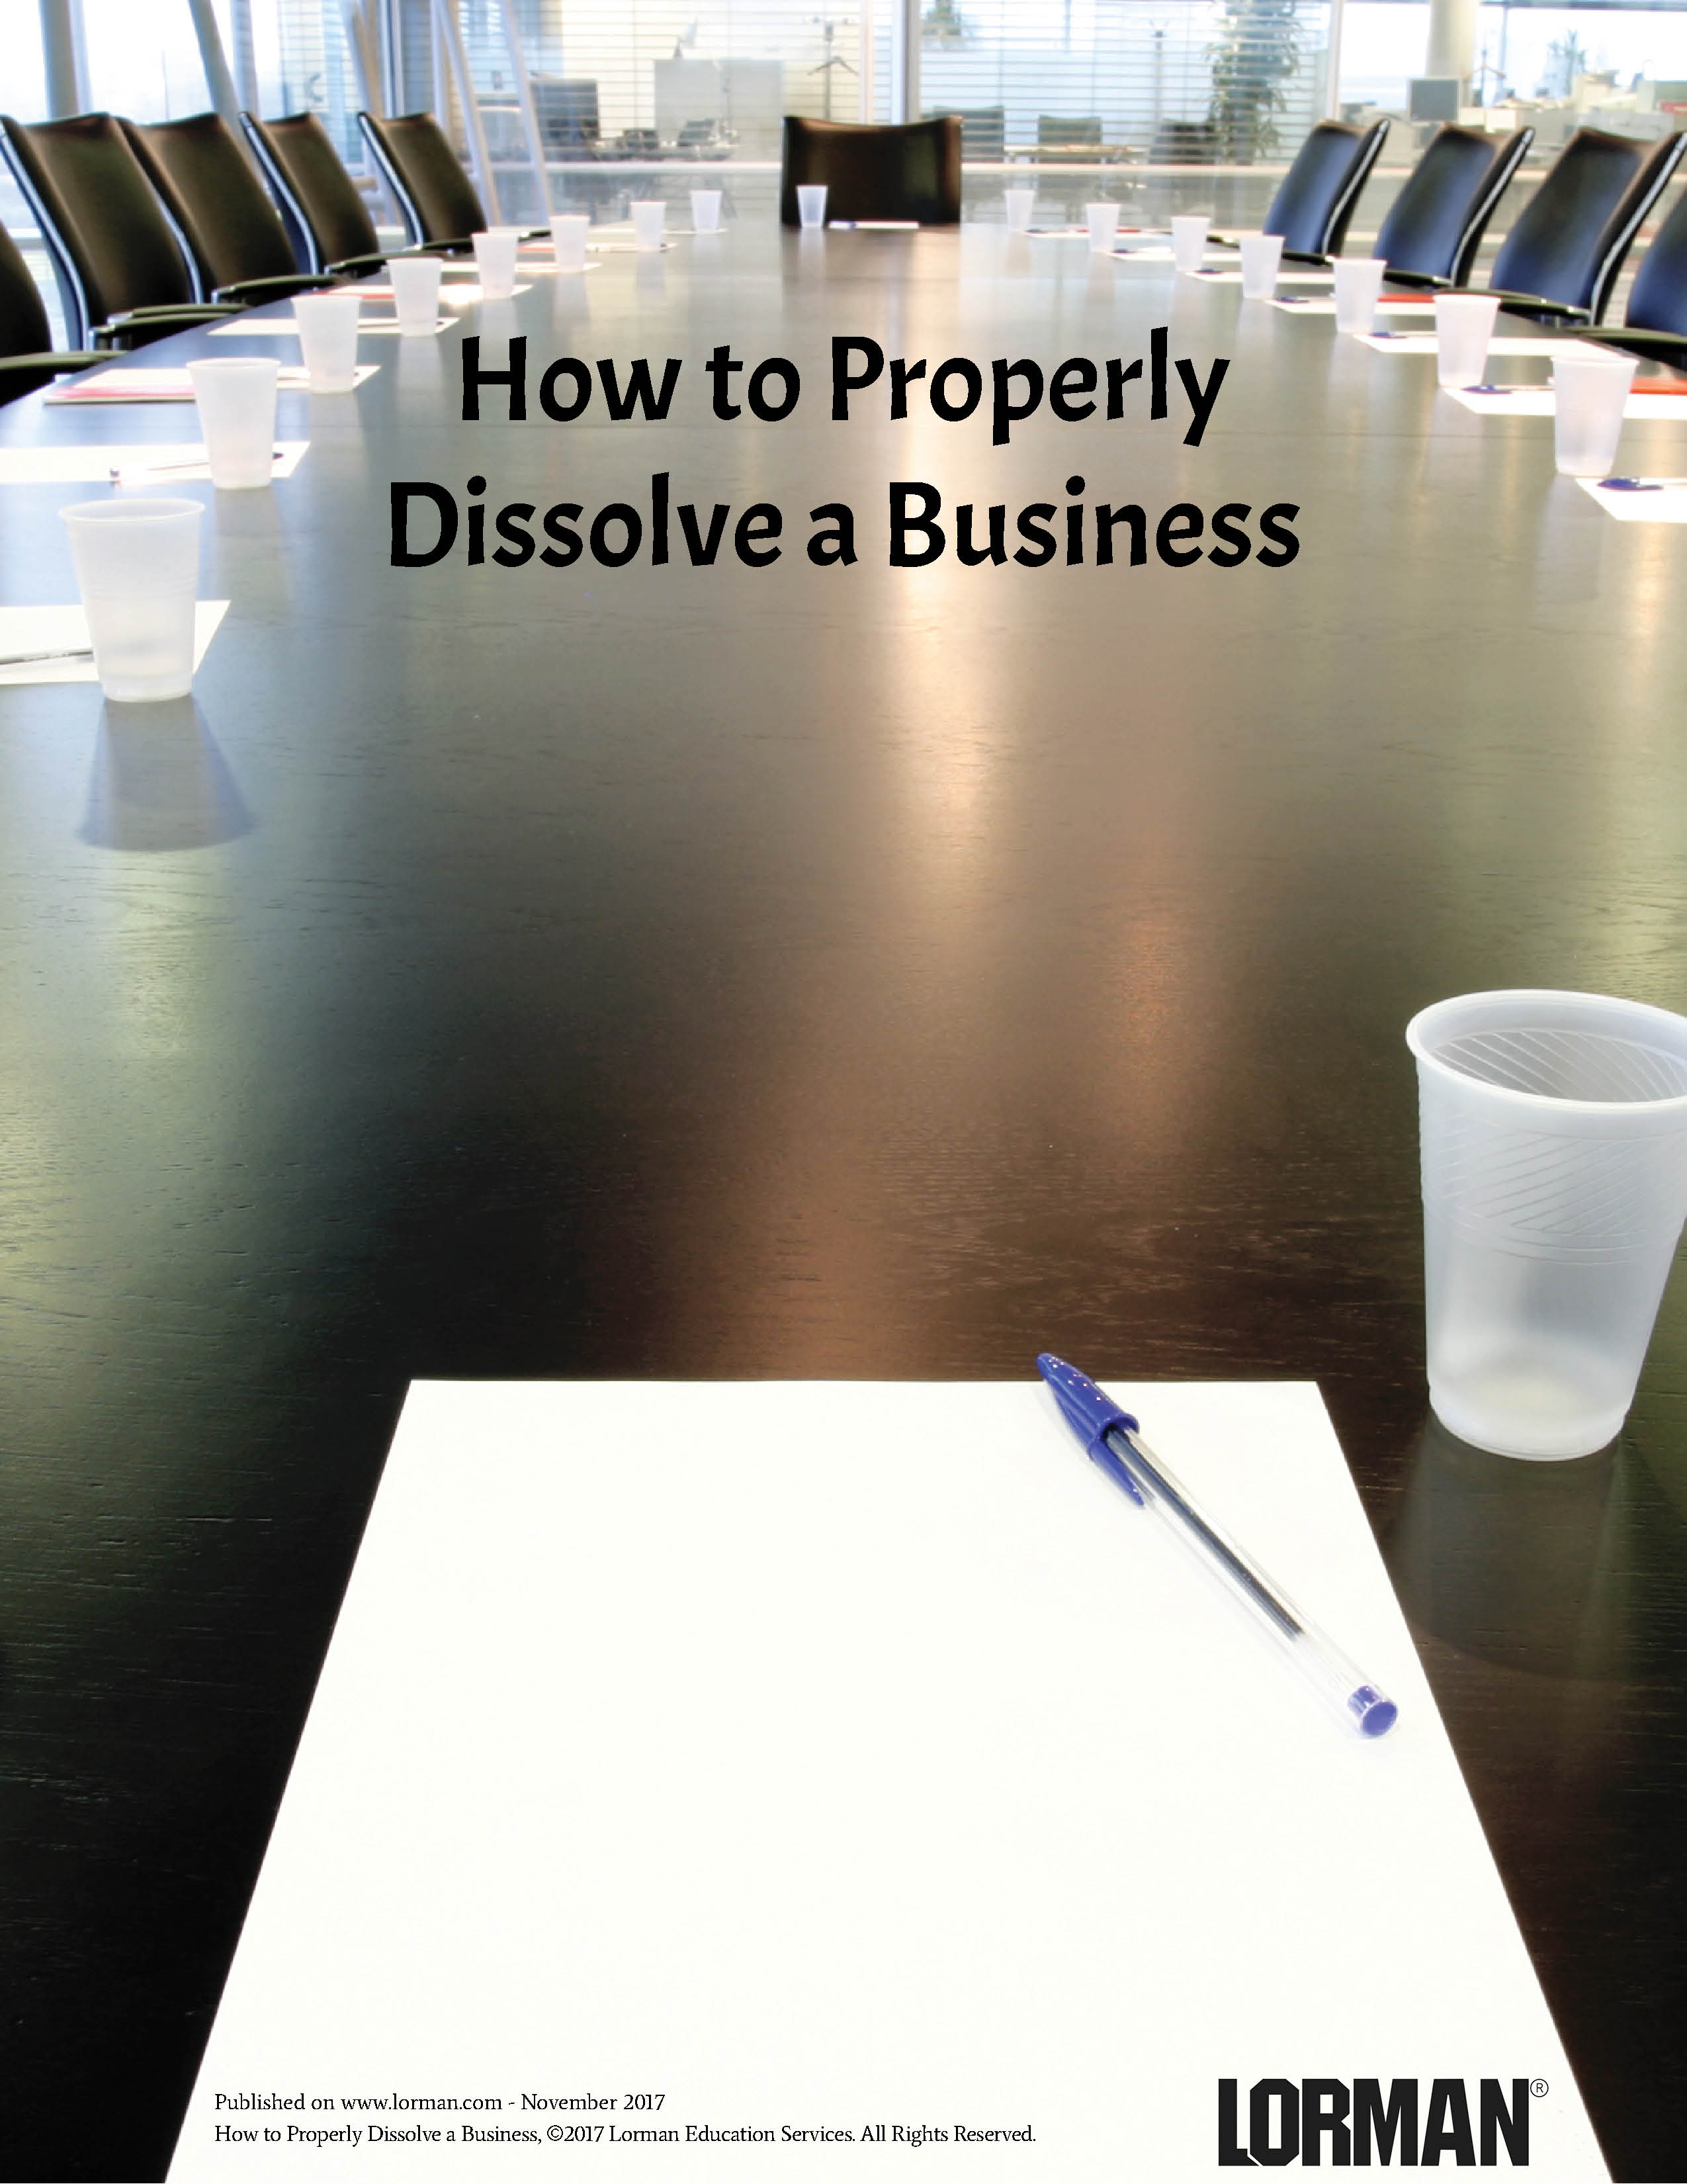 How to Properly Dissolve a Business